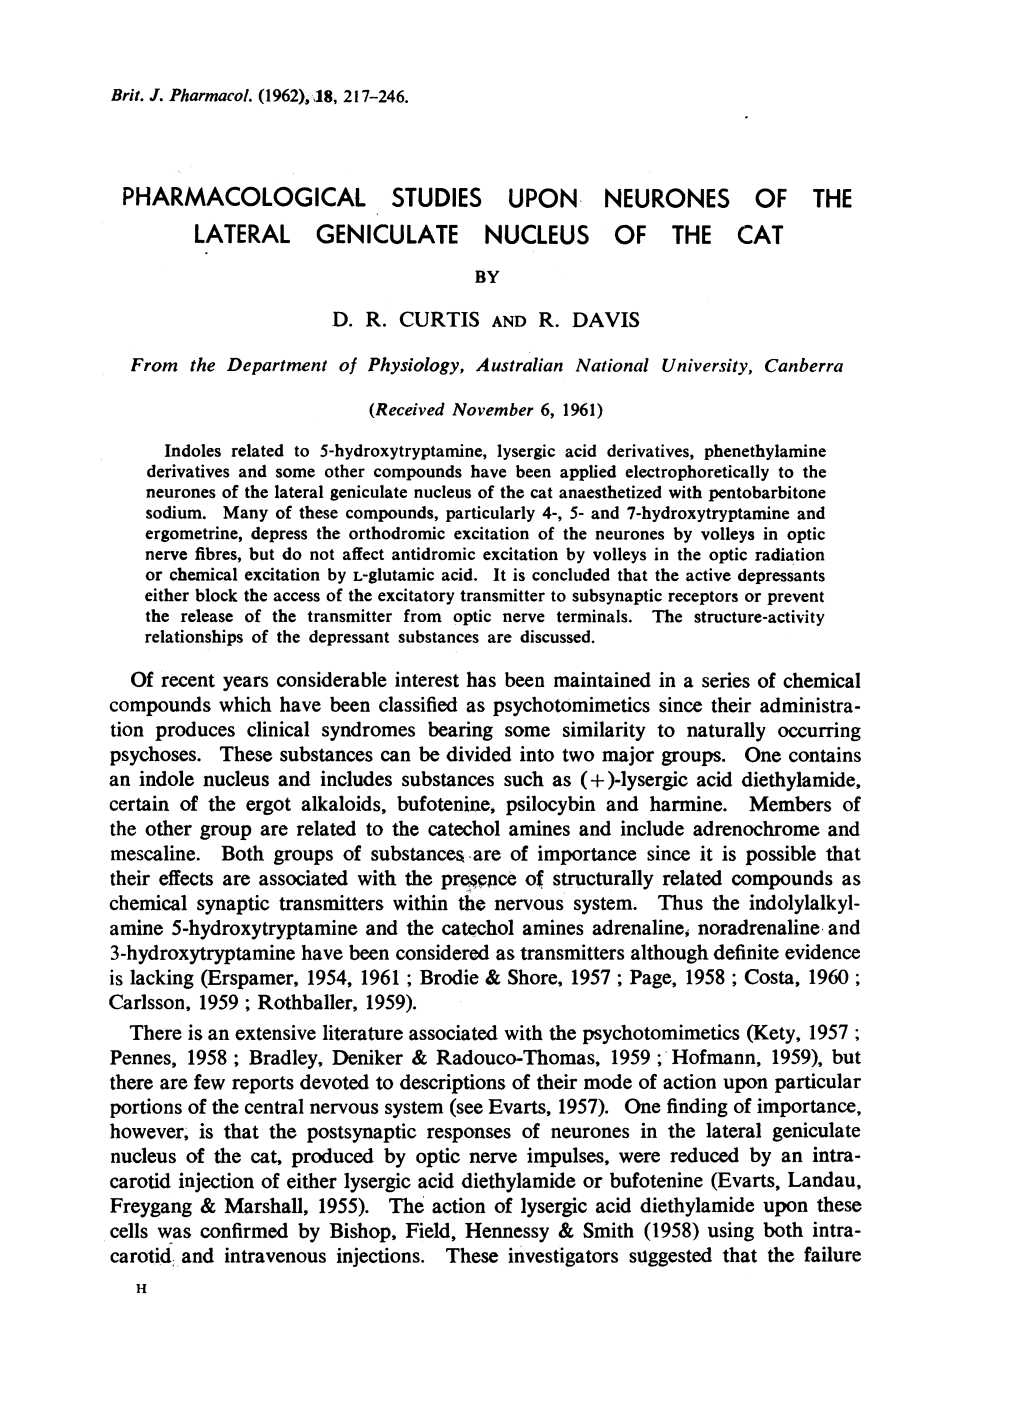 Pharmacological Studies Upon Neurones of the Lateral Geniculate Nucleus of the Cat by D